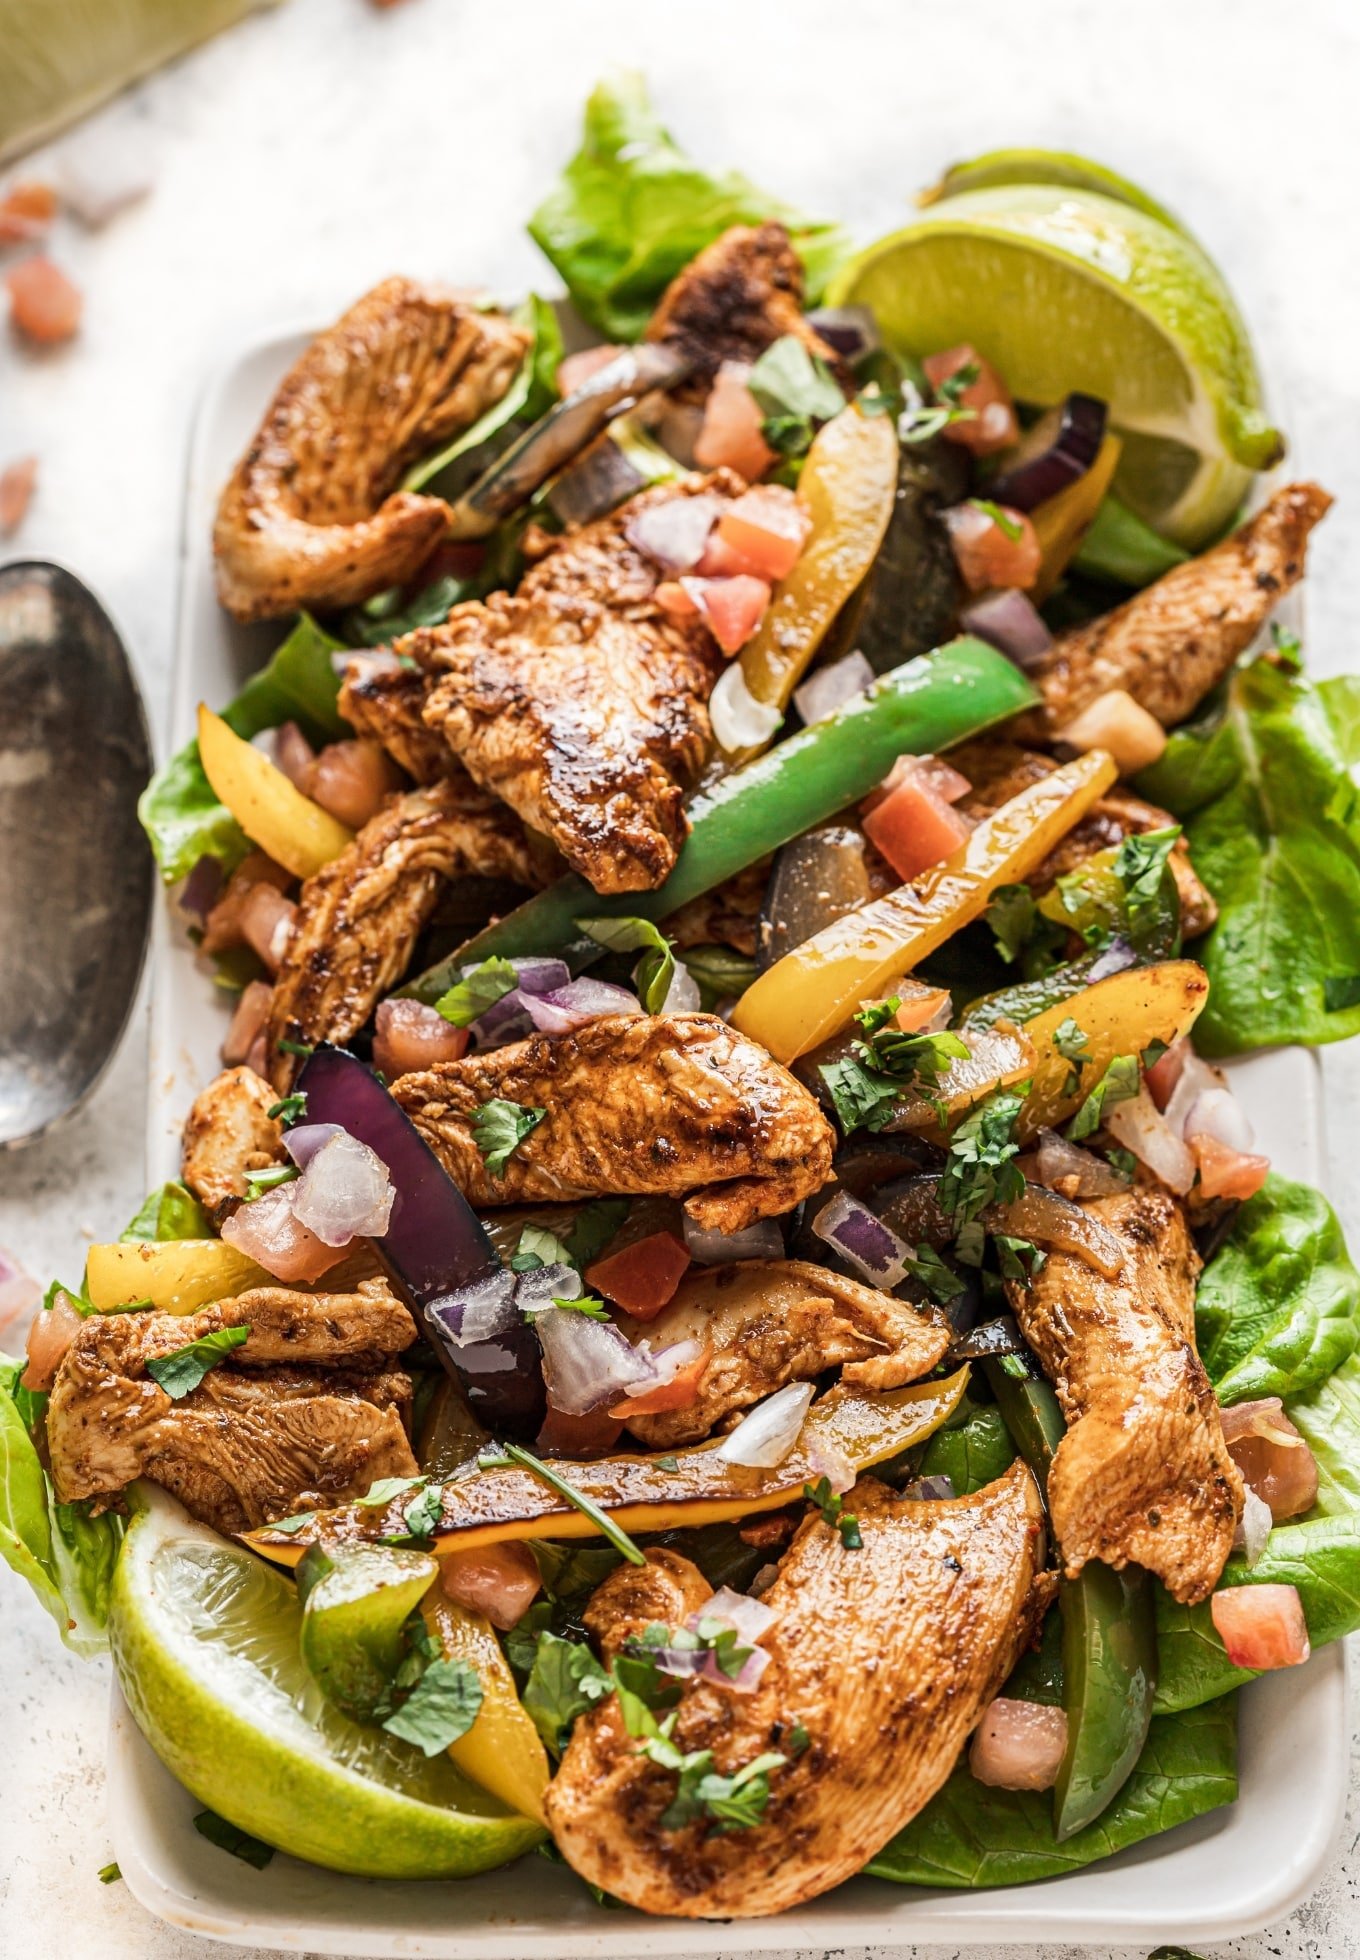 https://thewholecook.com/wp-content/uploads/2021/02/Skillet-Chicken-Fajitas-by-The-Whole-Cook-vertical1.jpg